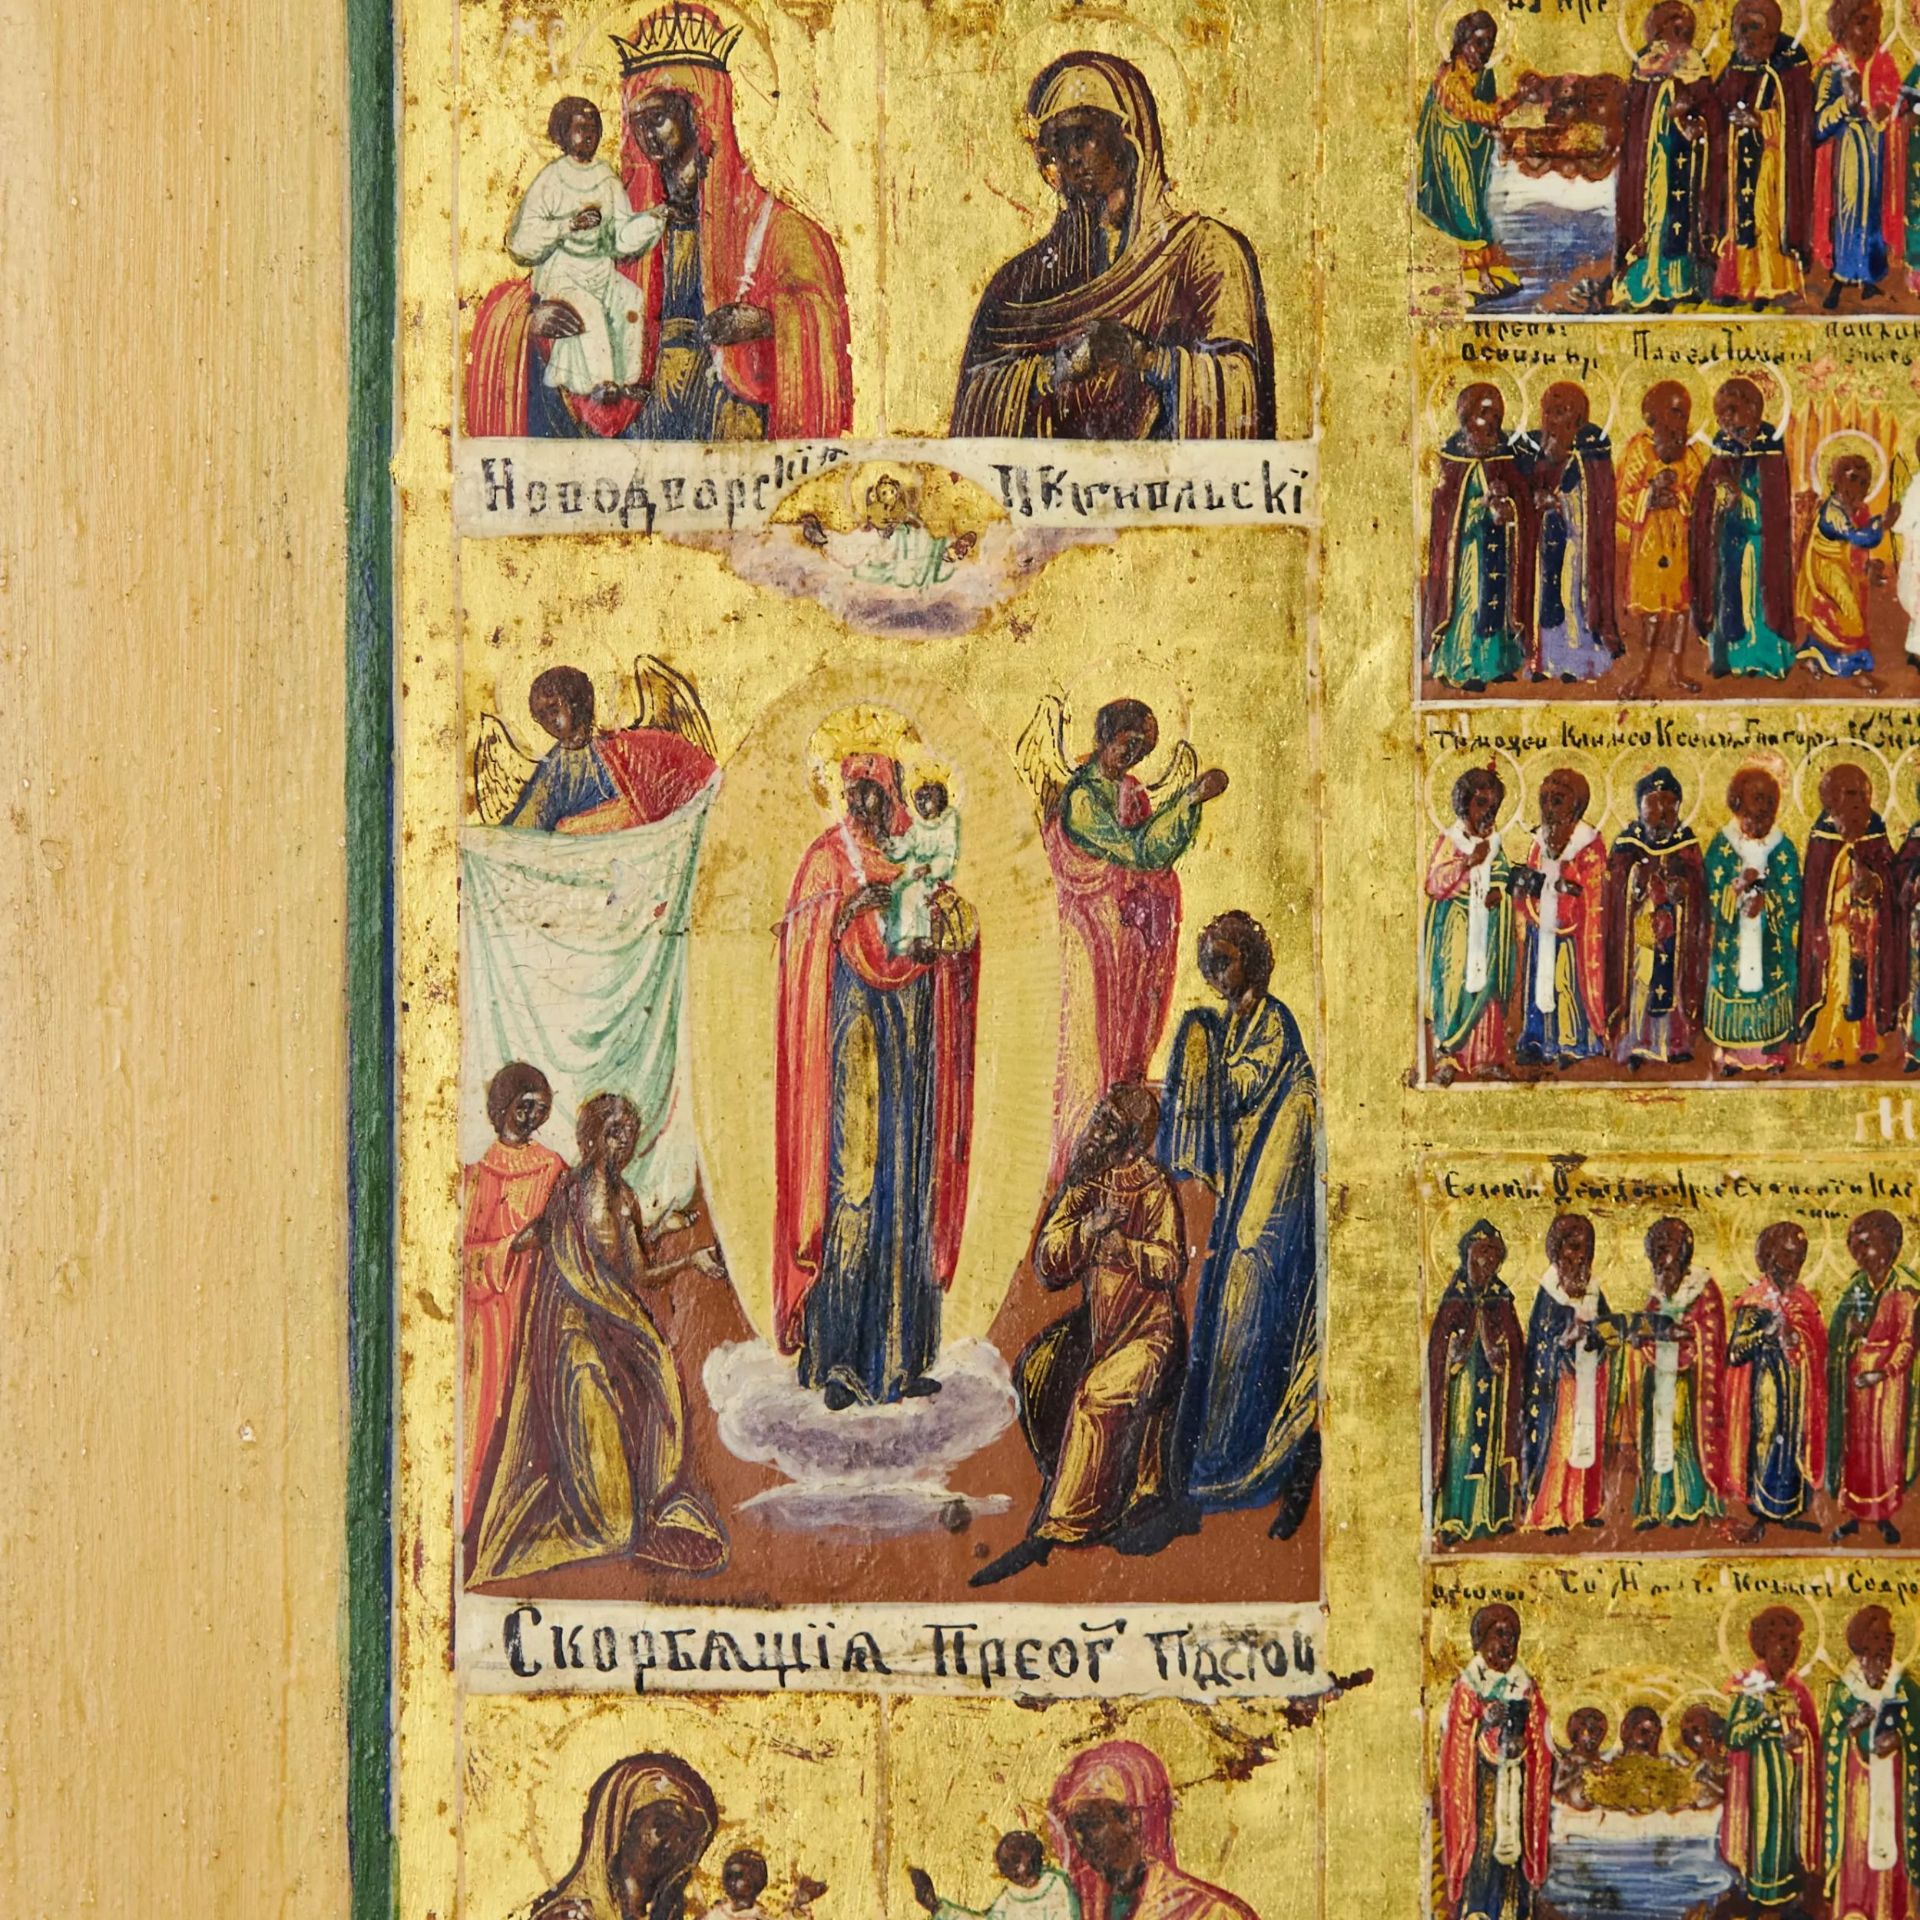 Magnificent holidays with an annual menaion and a two-row cycle of Theotokos icons. 19th century. - Bild 9 aus 11